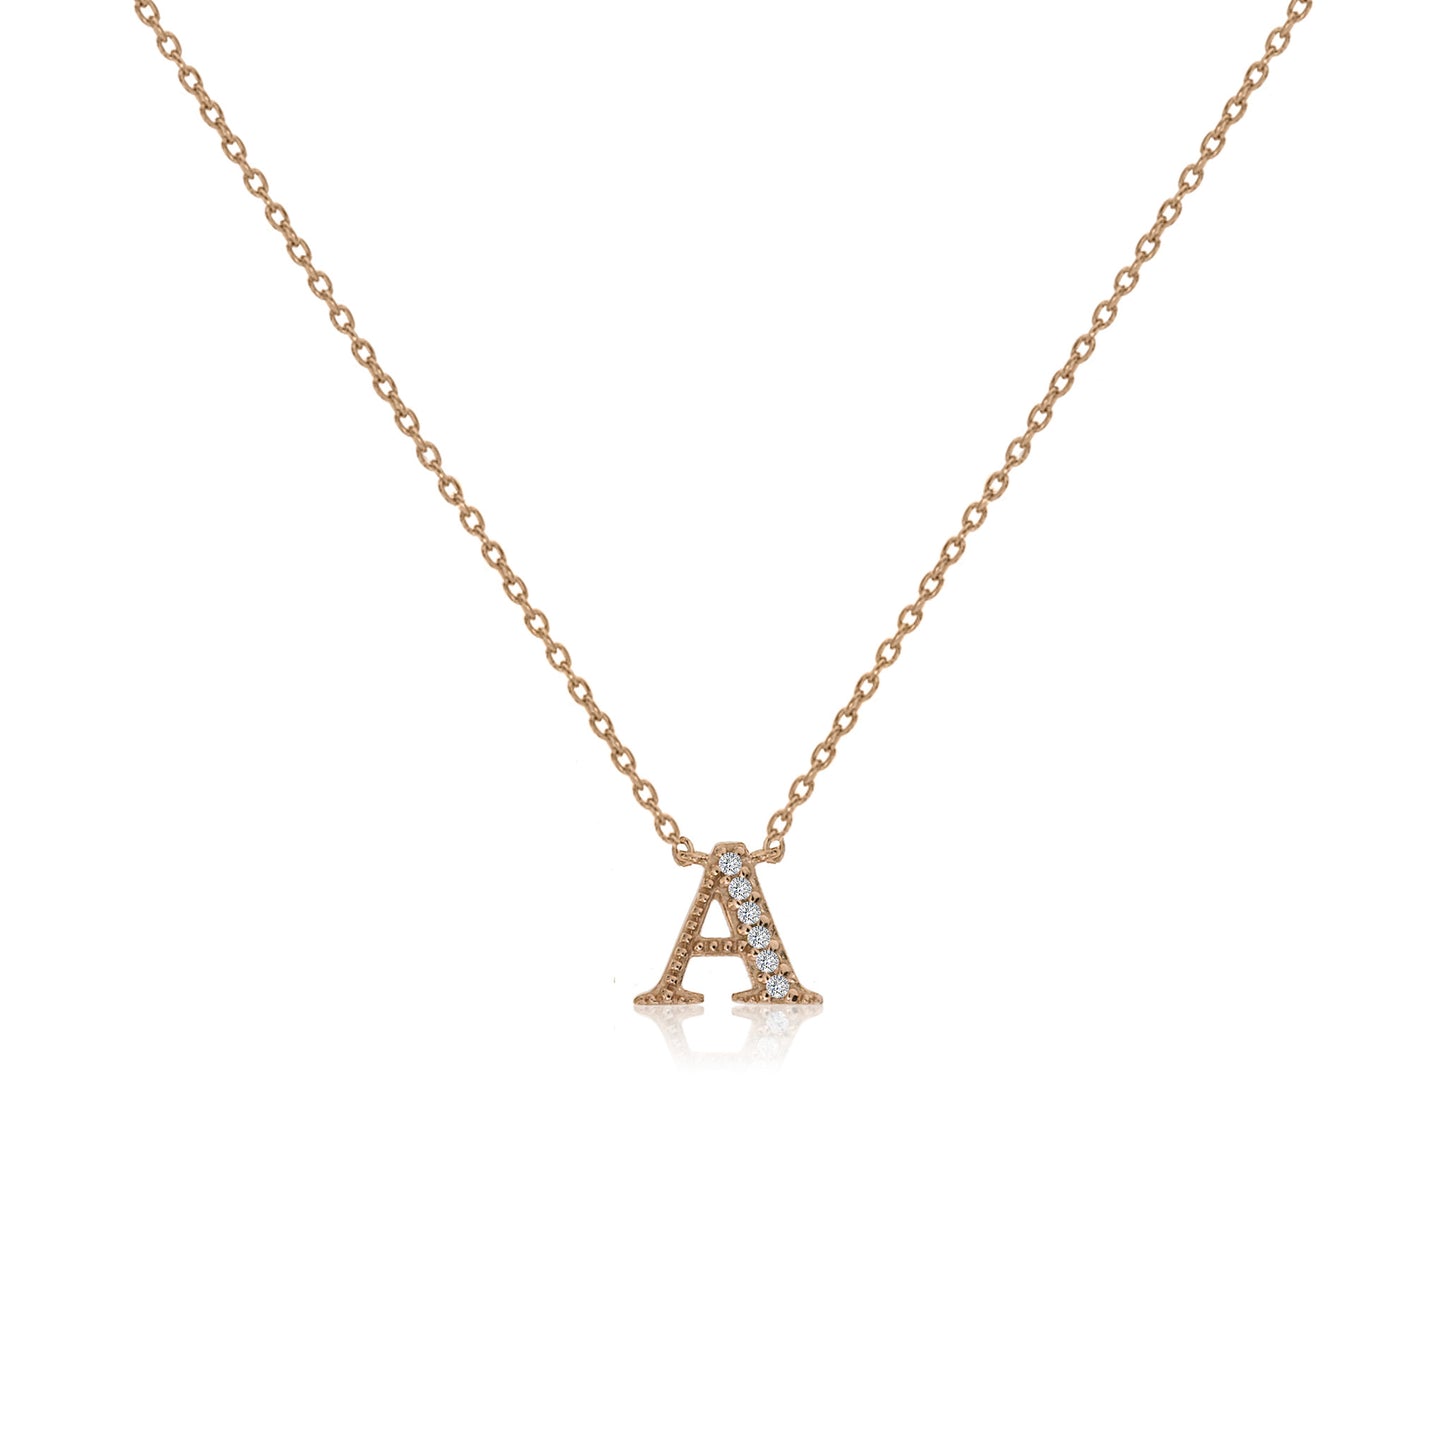 NT-26/R/A - Initial "A" Necklace with Sliding Length Adjuster